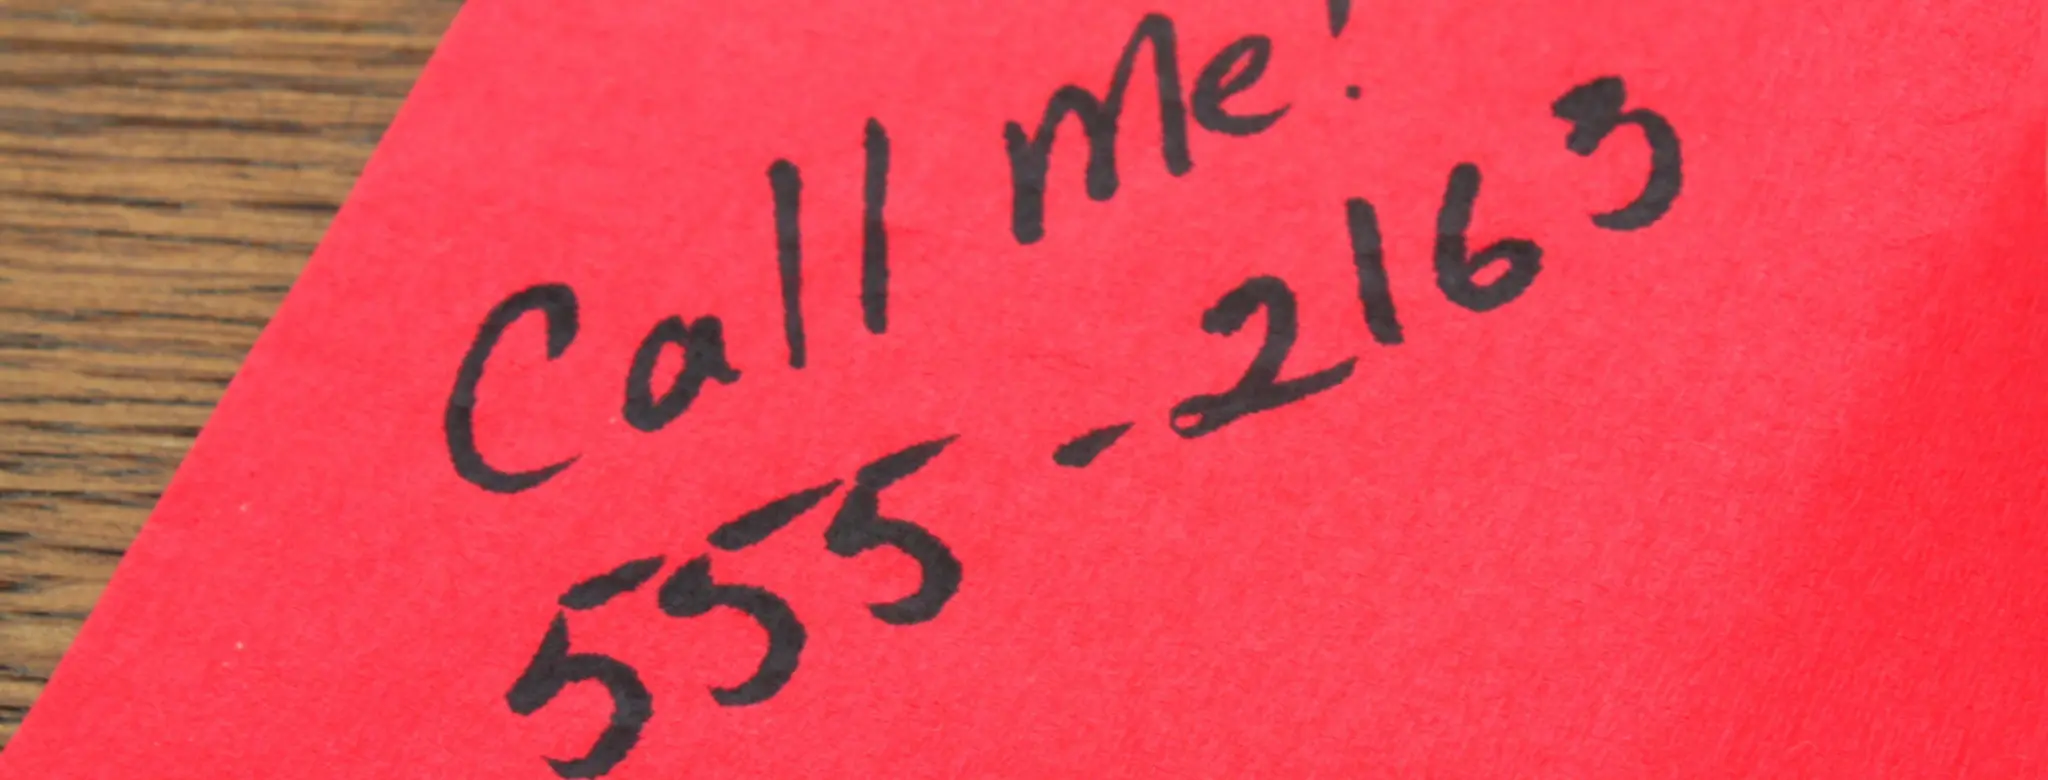 Phone number written on a napkin